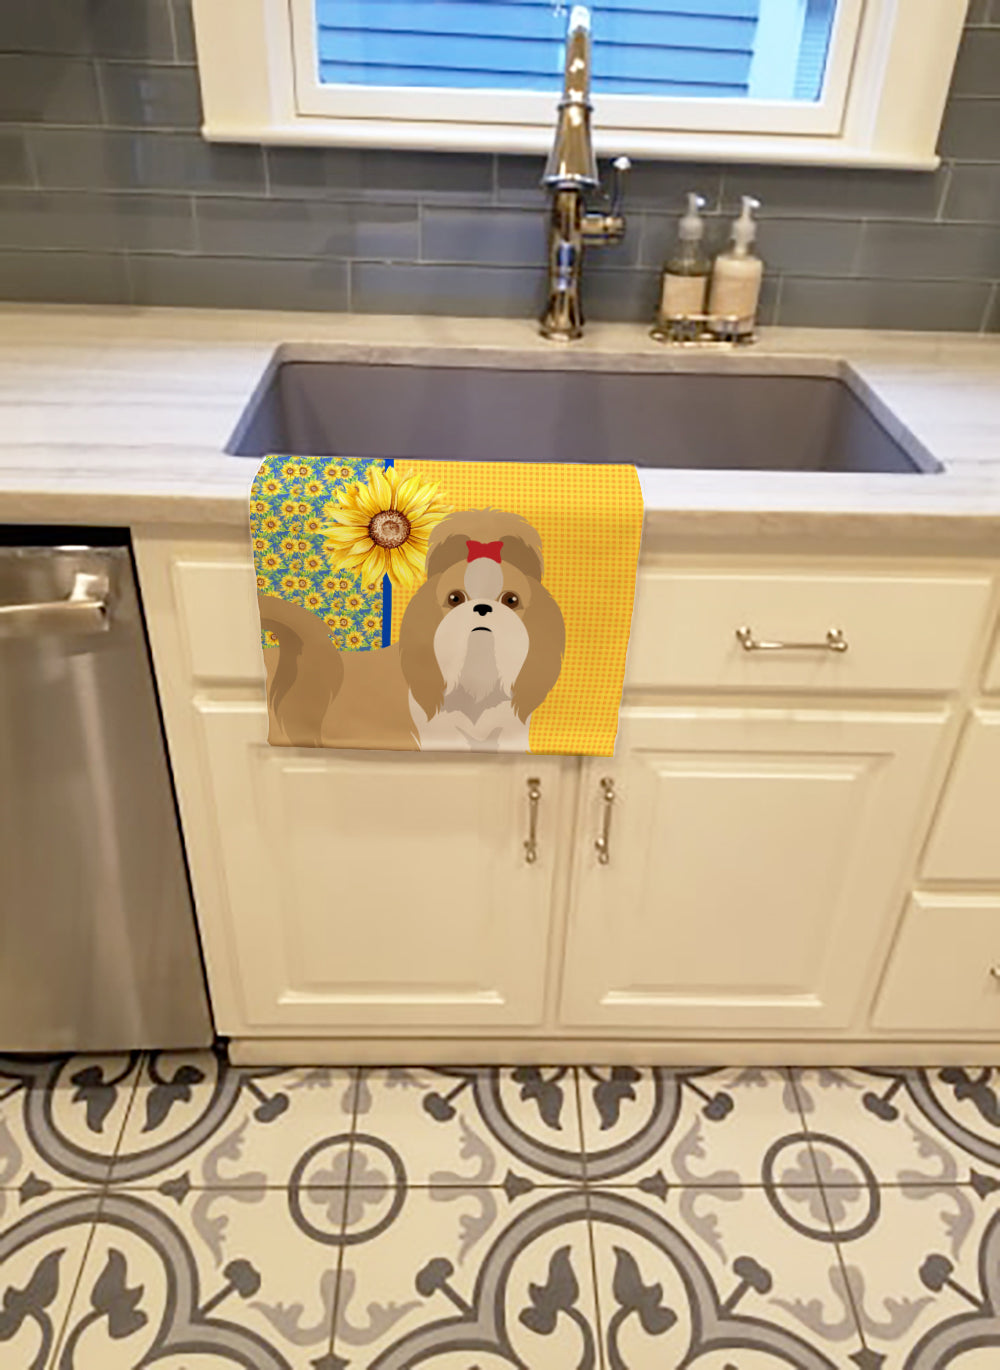 Buy this Summer Sunflowers Gold and White Shih Tzu Kitchen Towel